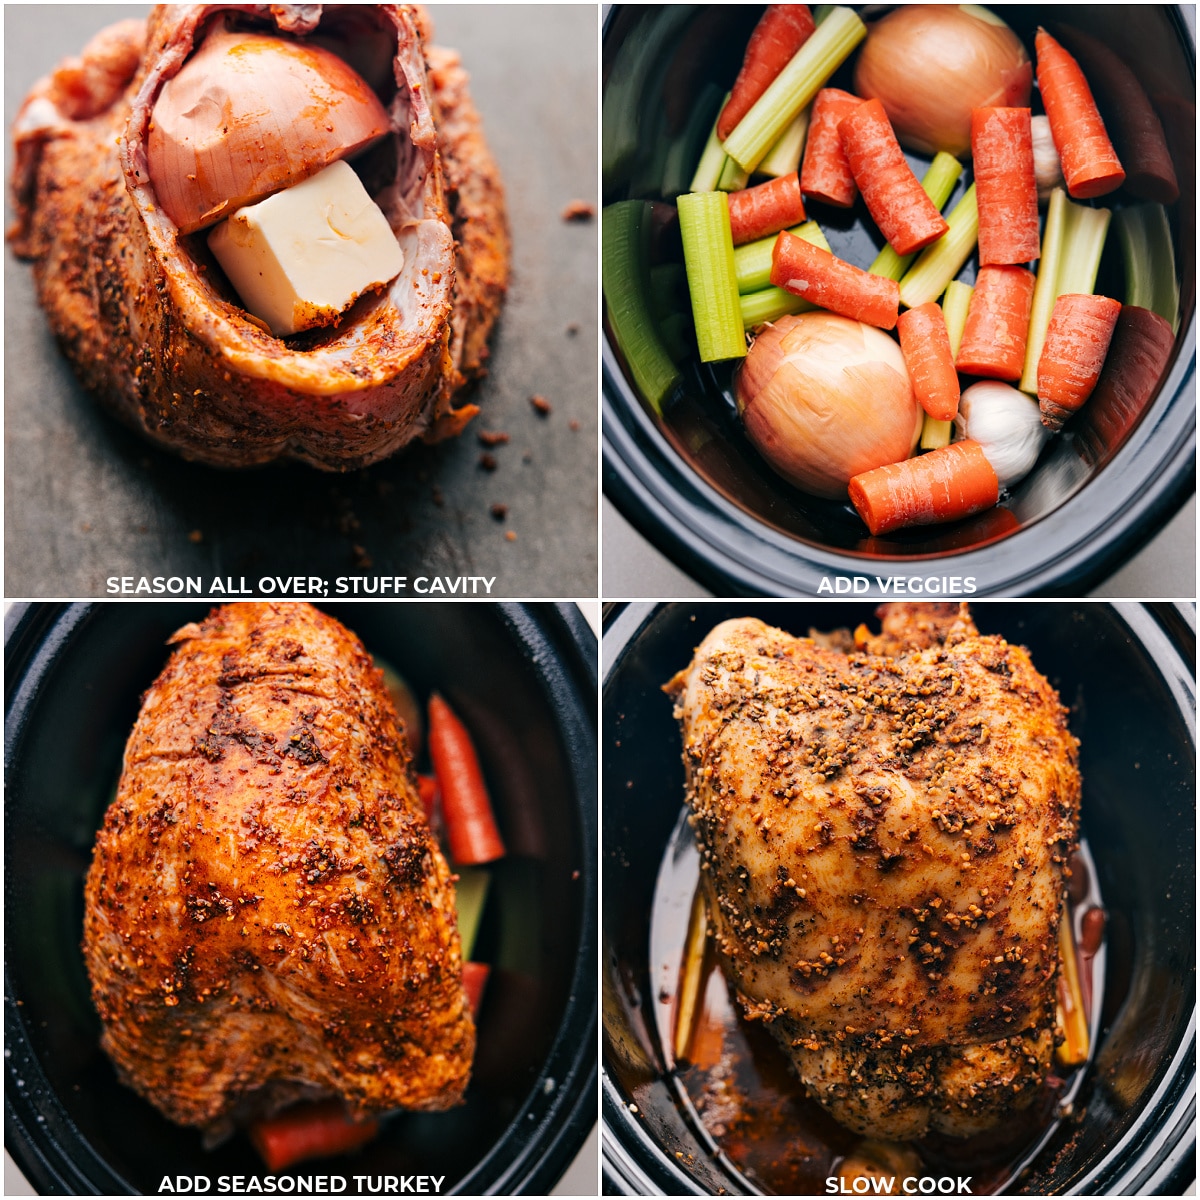 Seasoning the turkey all over, stuffing the cavity, adding vegetables to a crockpot, and placing the turkey on top for slow cooking the delicious turkey breast in crockpot.